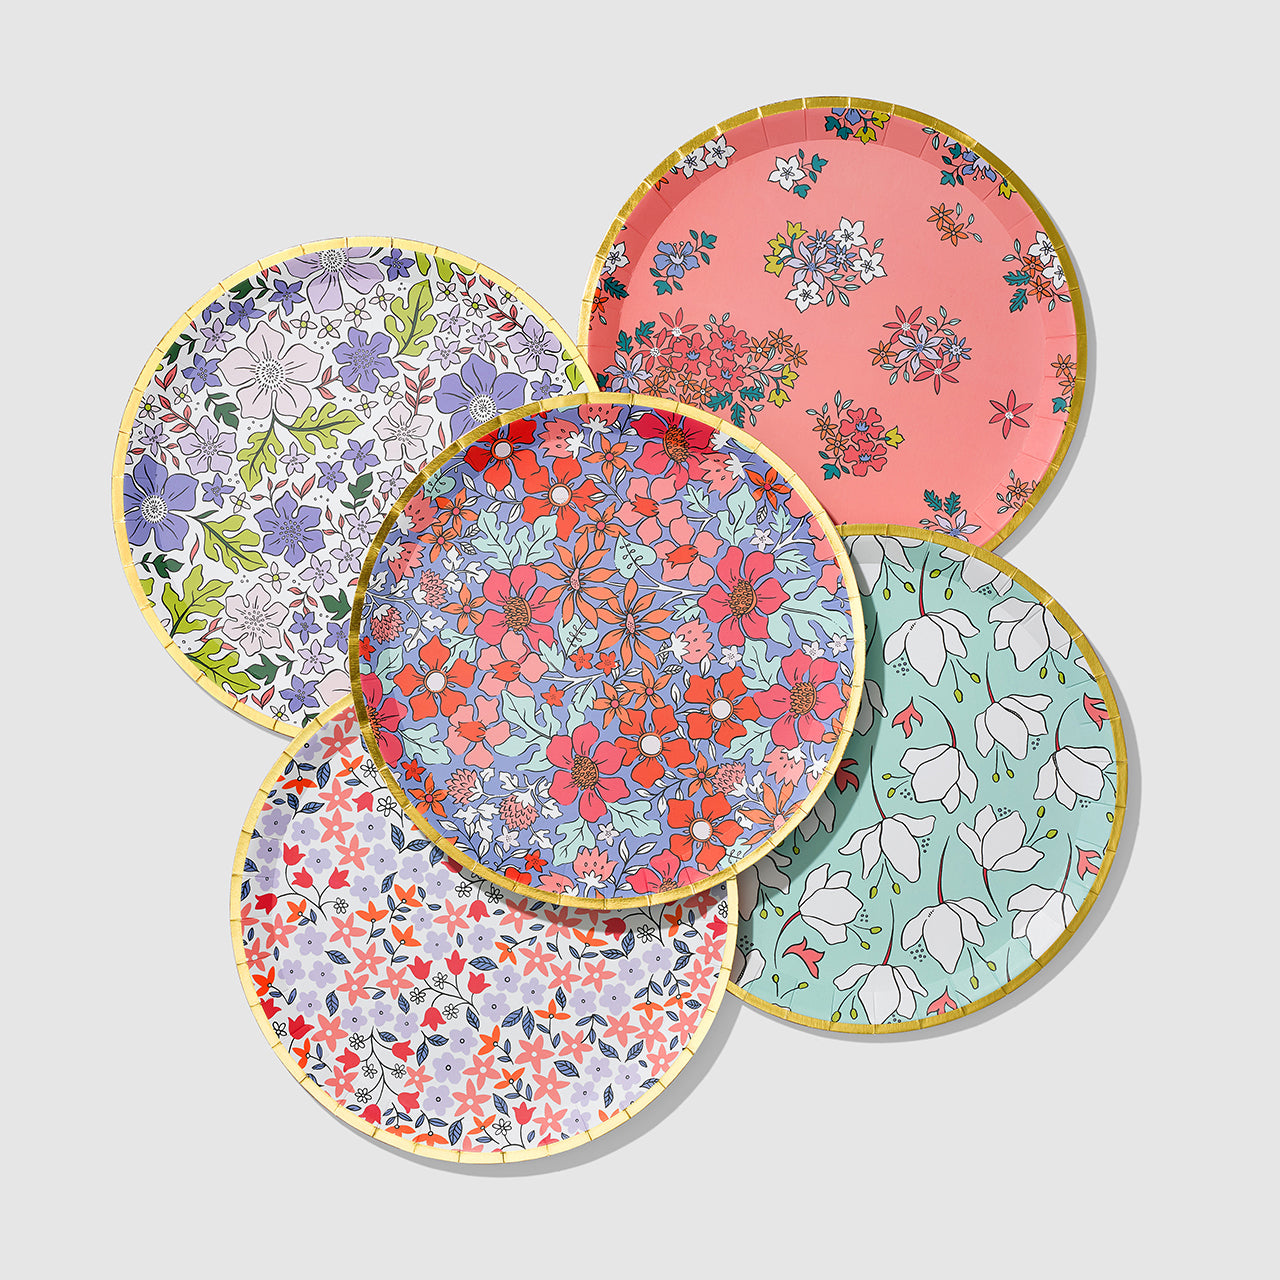 In Full Bloom Plates, set of 10